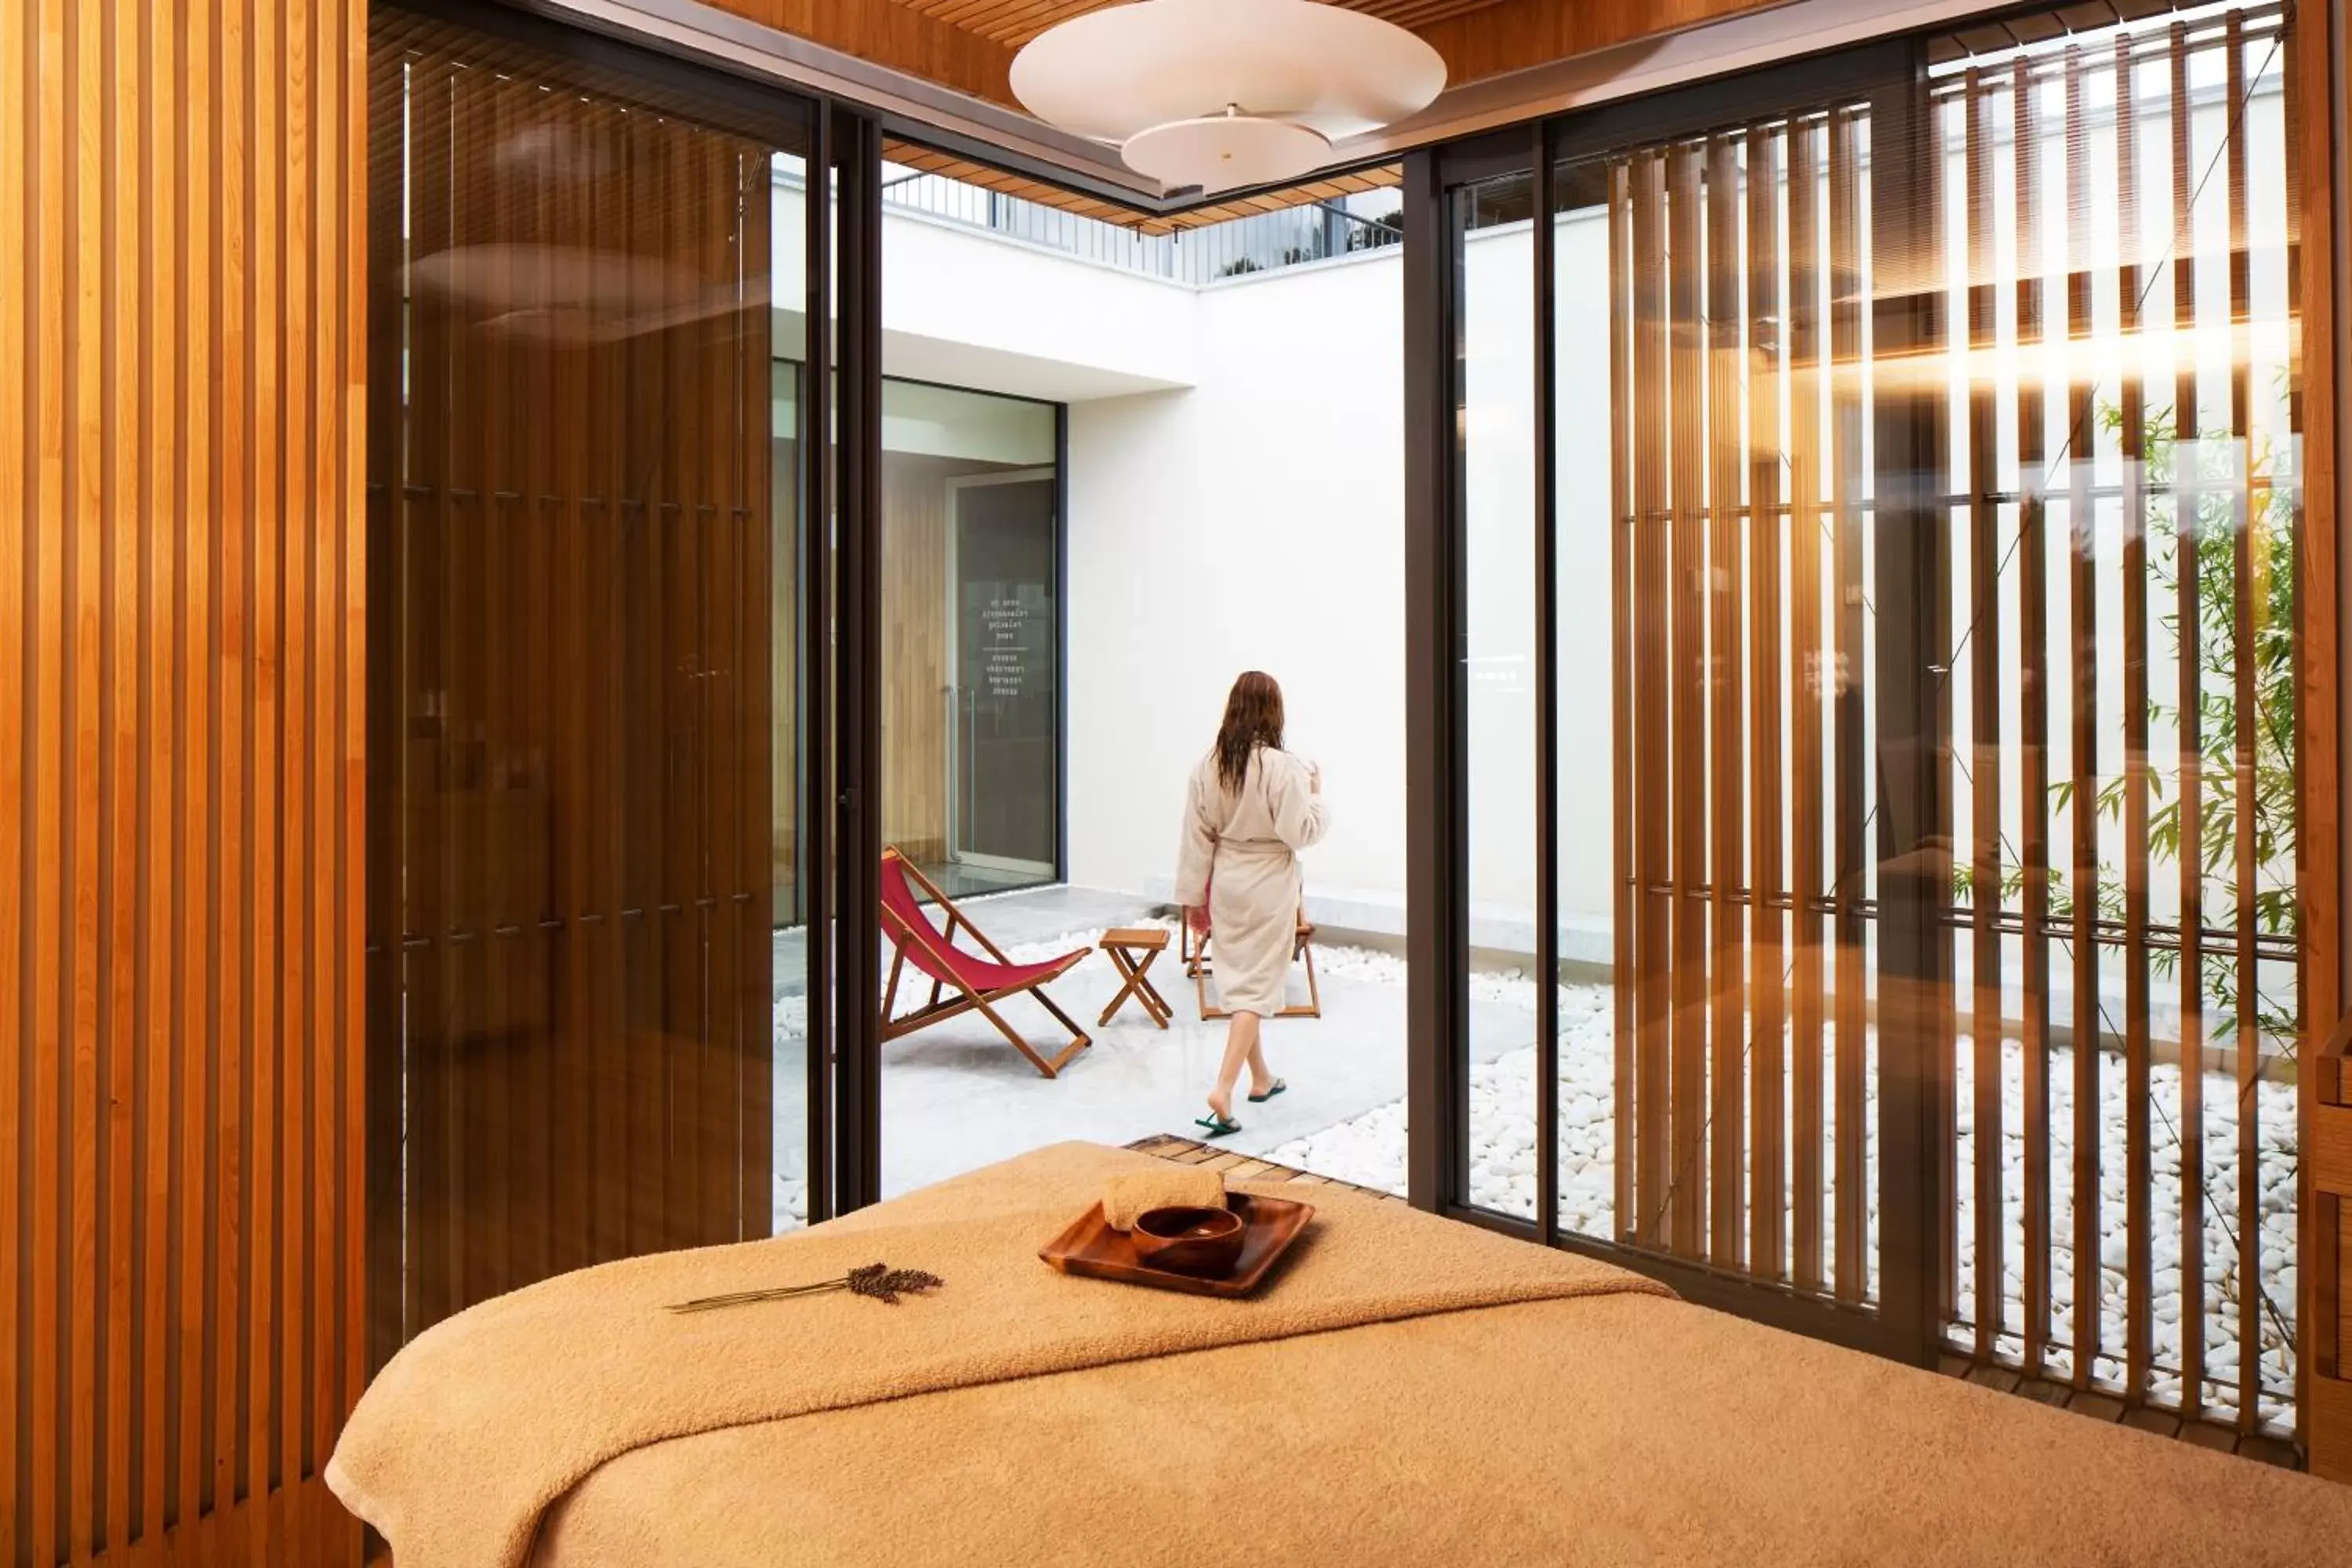 Spa and wellness centre/facilities in Hotel Minho